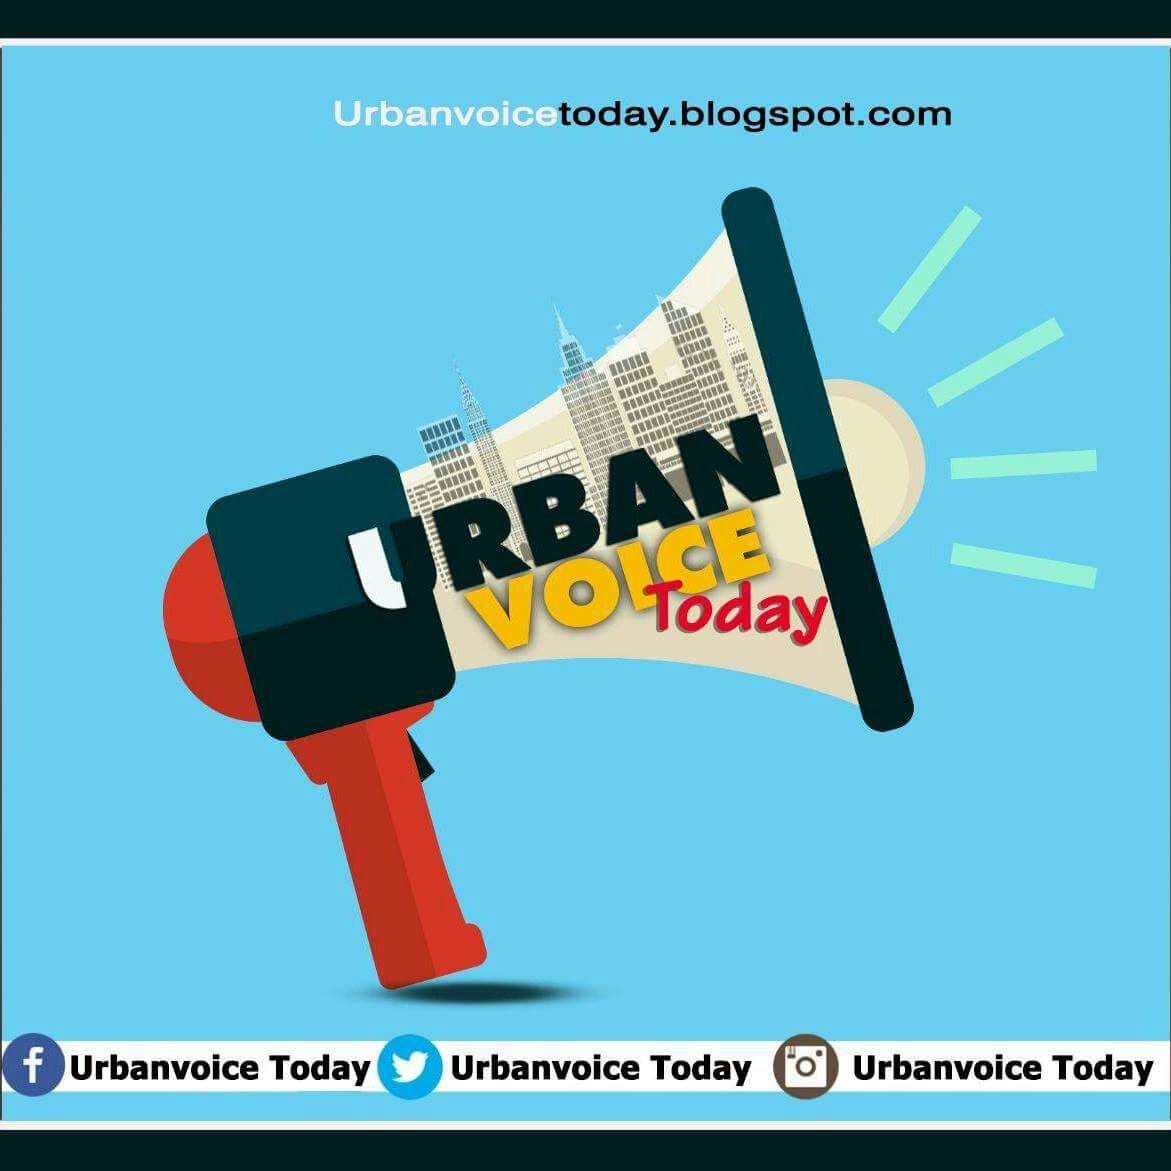 WELCOME TO URBAN VOICE TODAY